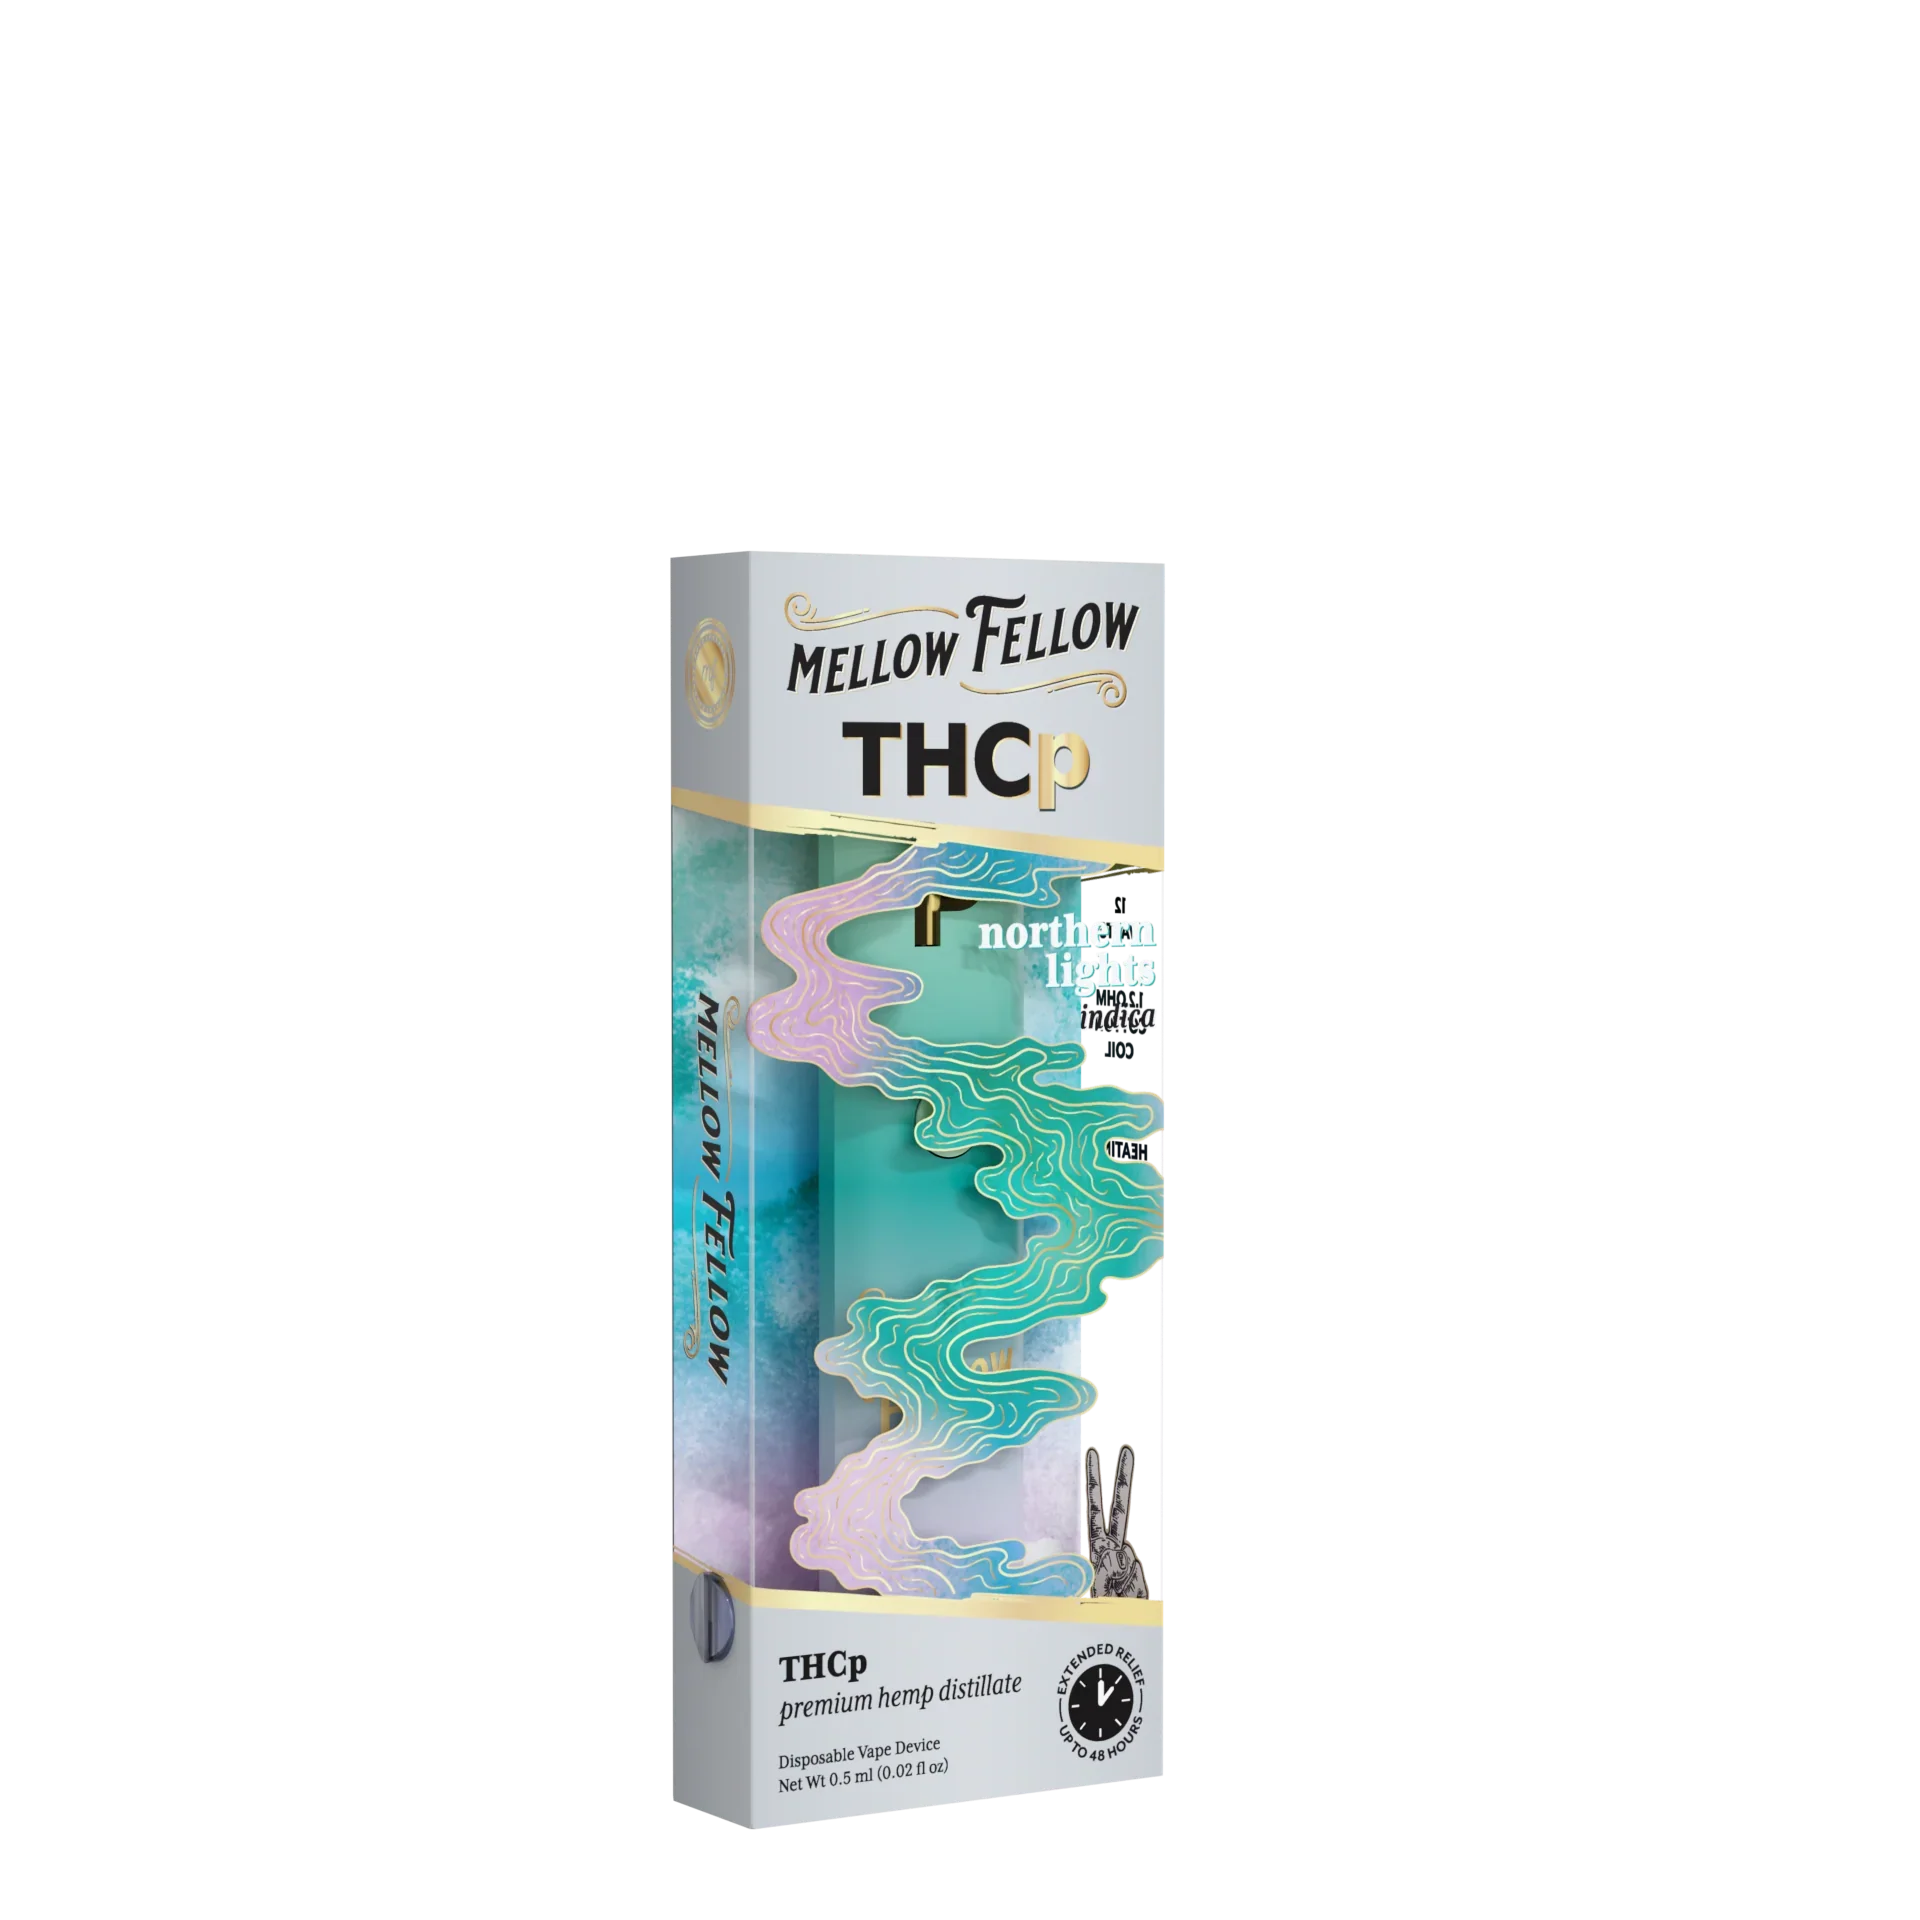 Mellow Fellow THCp 0.5g Disposable Vape - Northern Lights (Indica) Best Price